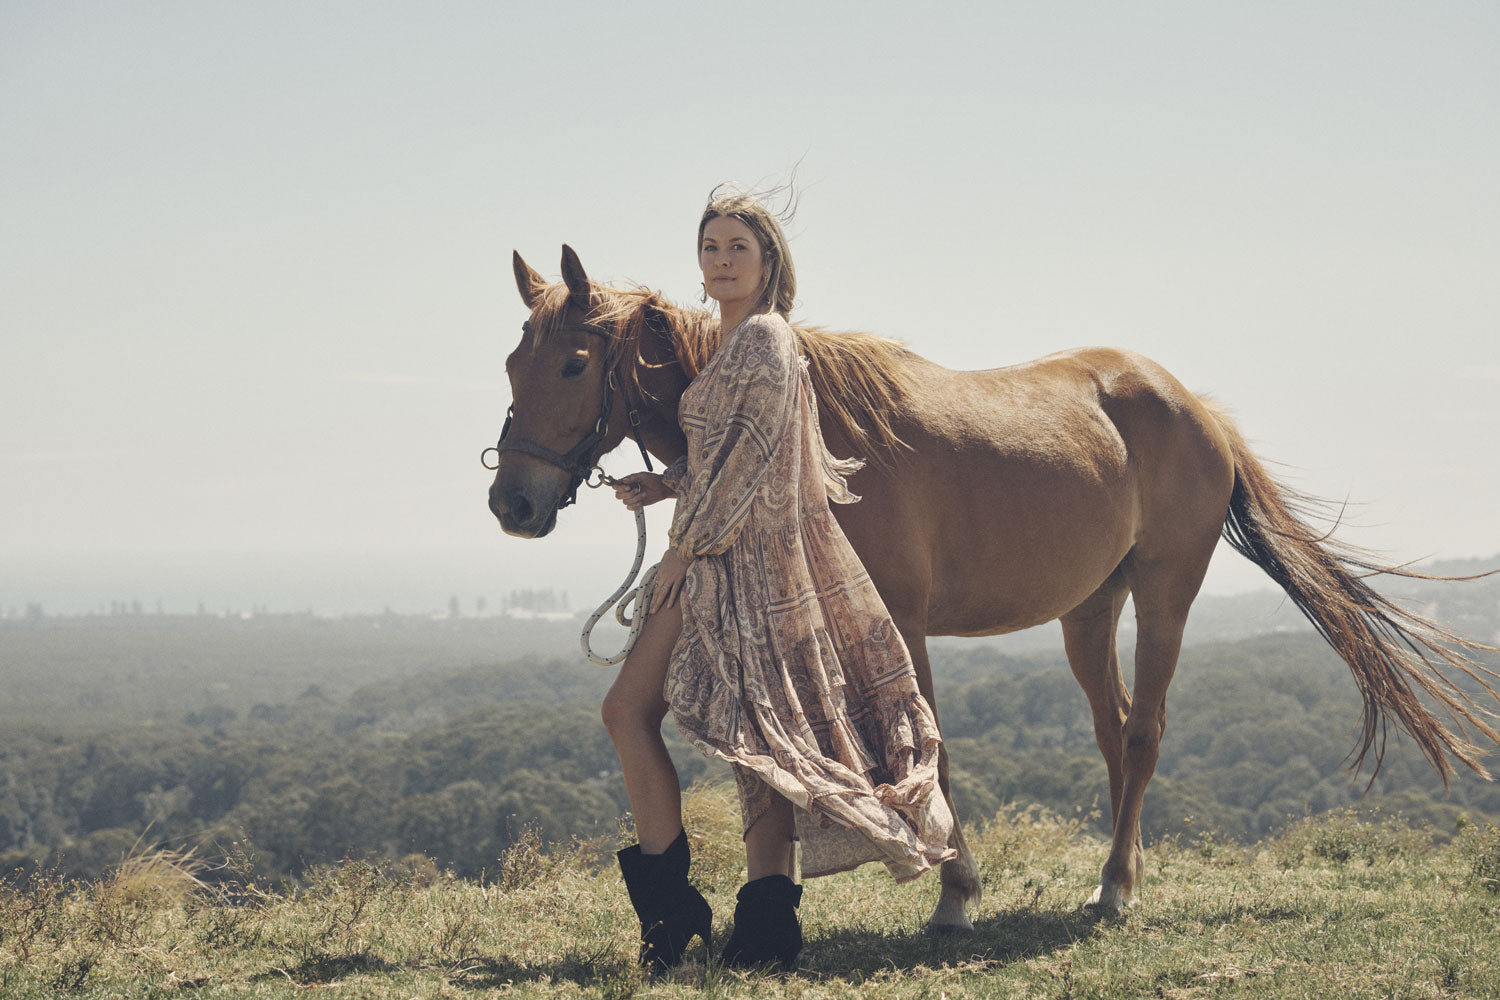 Jeweller and campaign model, Lucie Ferguson, posing in a green pasture with a brown horse while wearing gold jewellery, the Spell Cult Suede Slouch Boots with the pale pink, tiered Rumour Print Elle Gown featuring frills and elasticated cuffs.